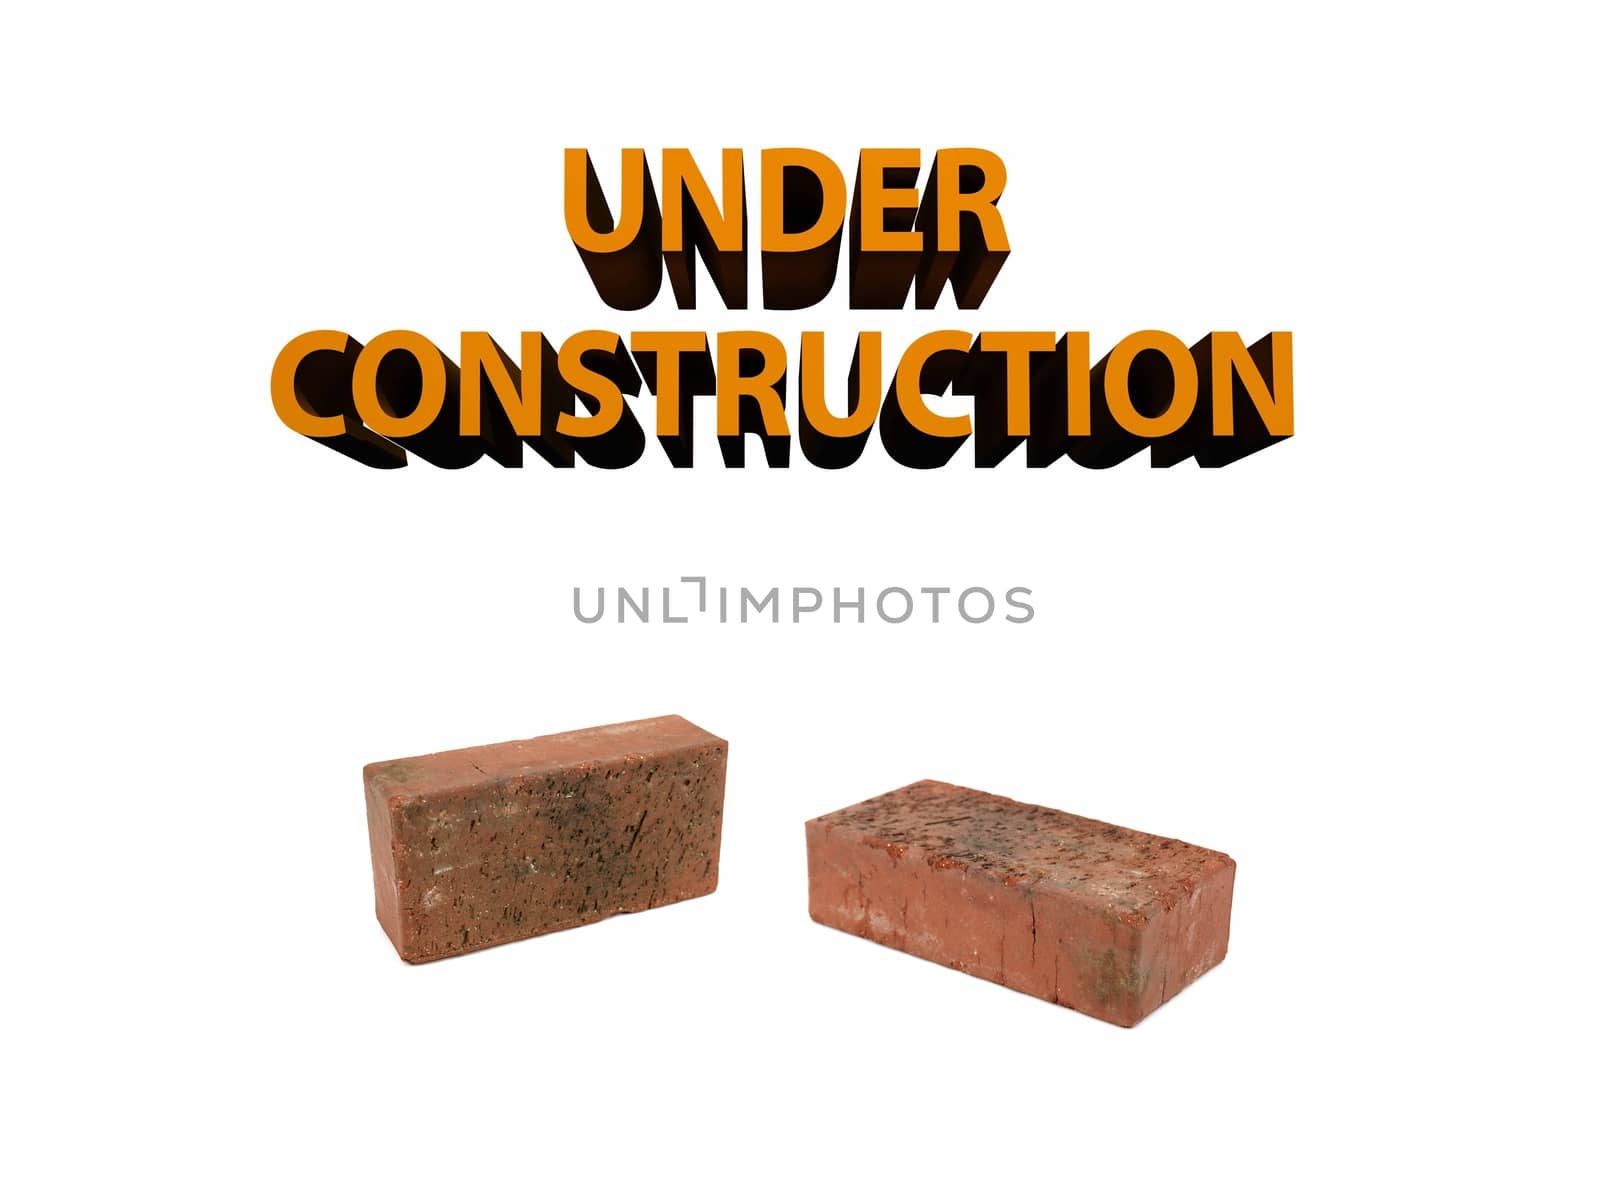 Under Construction by Kitch